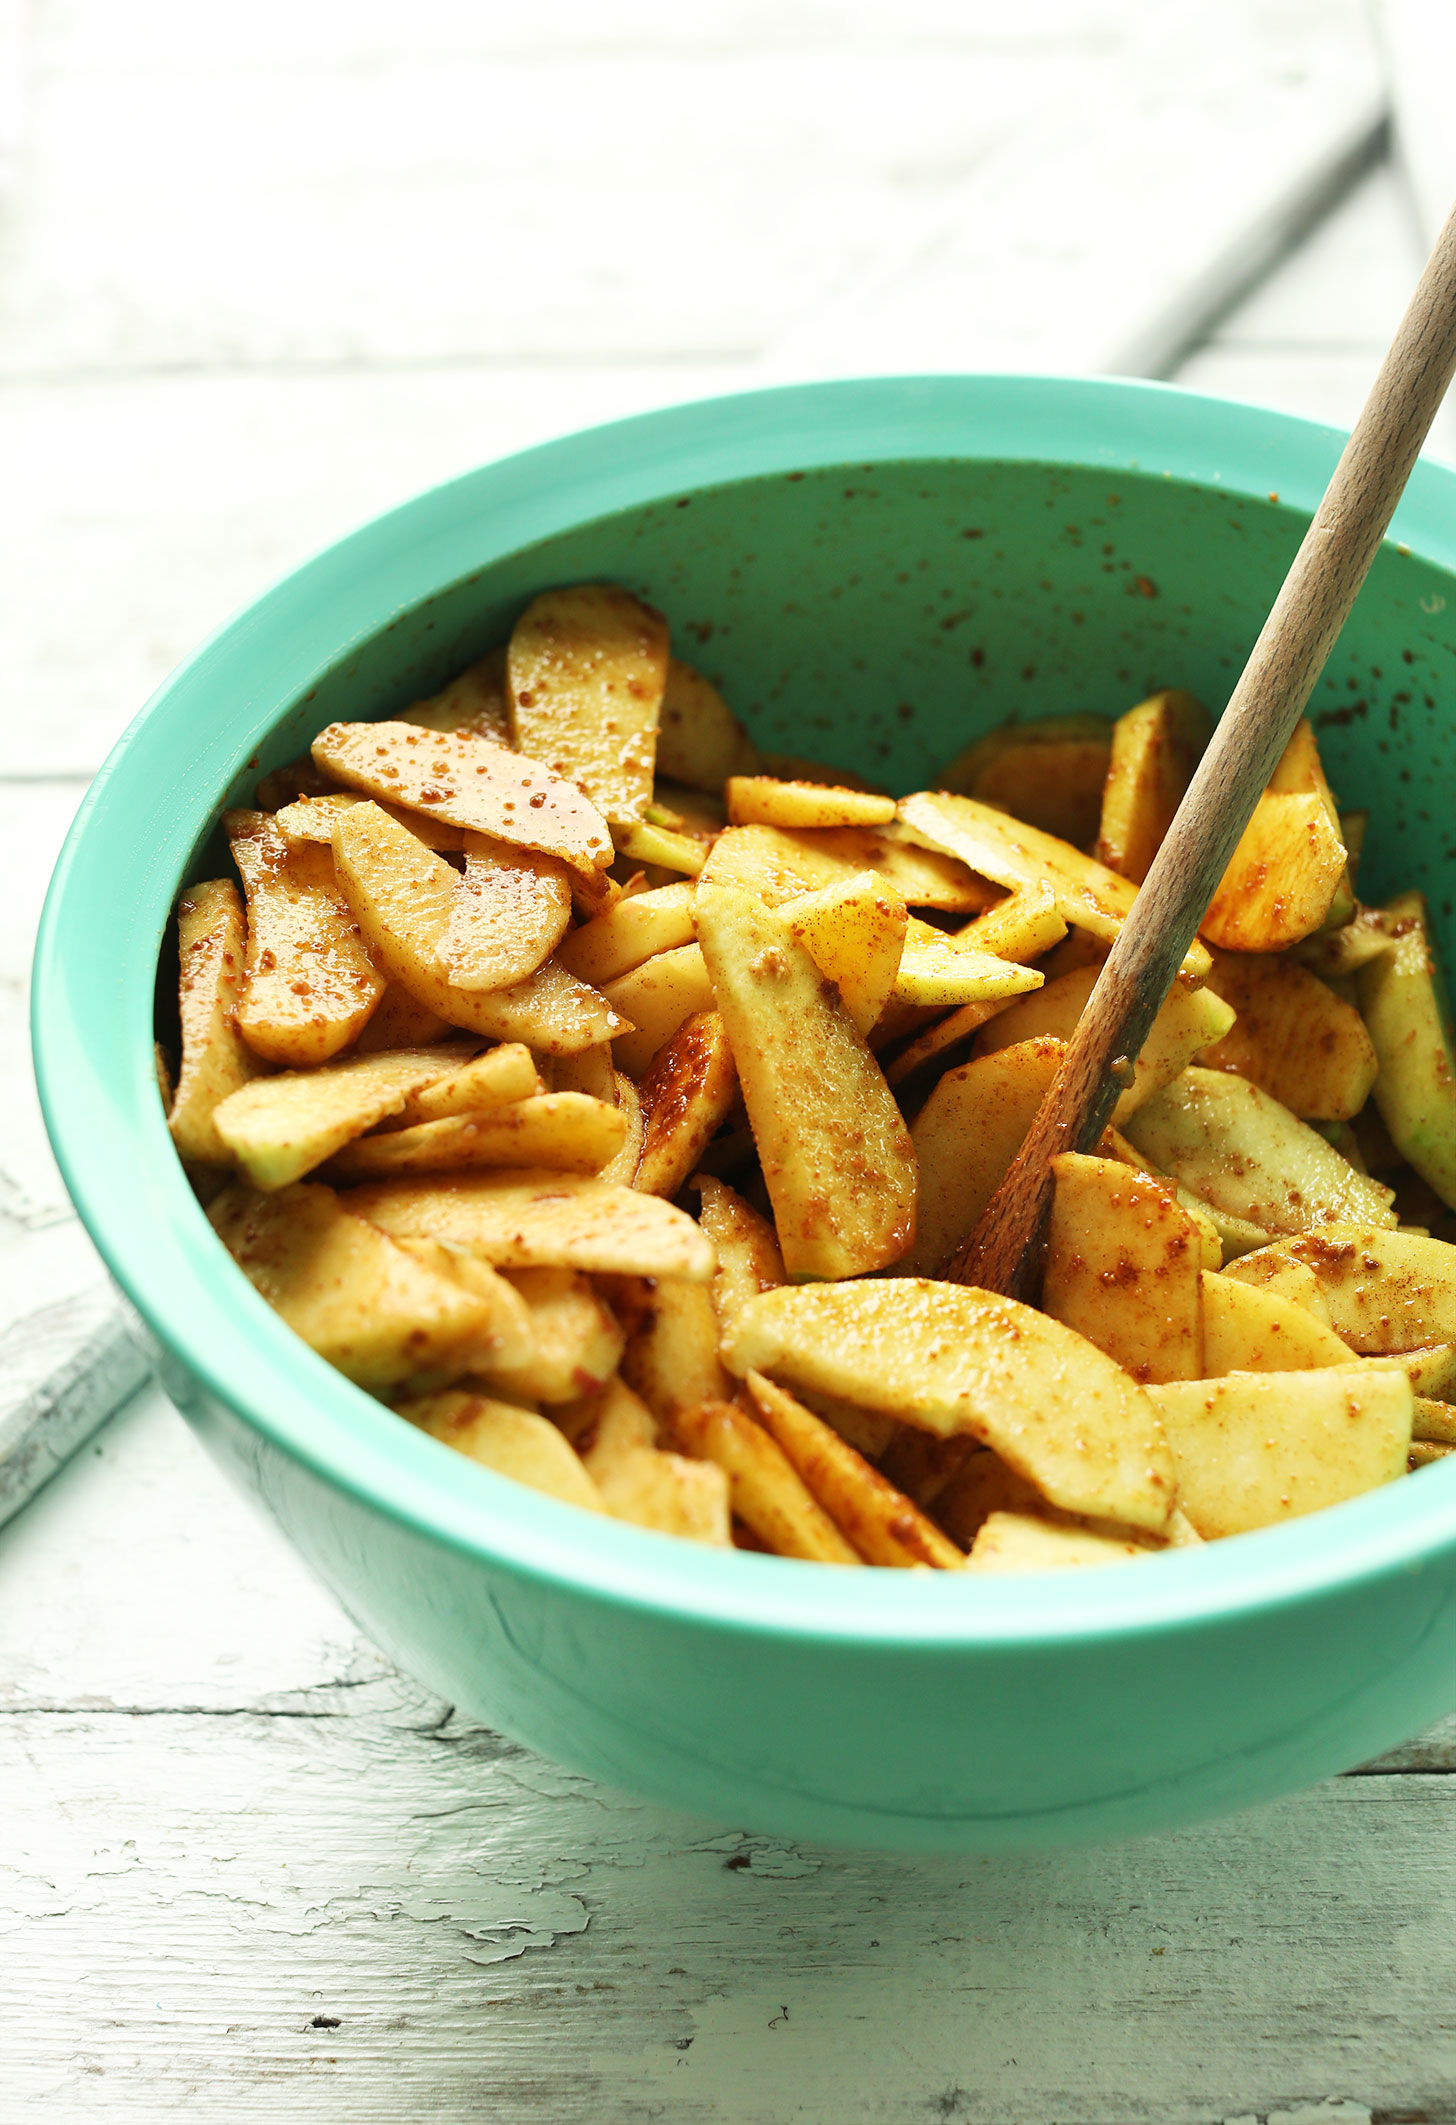 Apples coated with cinnamon and other ingredients for a delicious vegan fall dessert